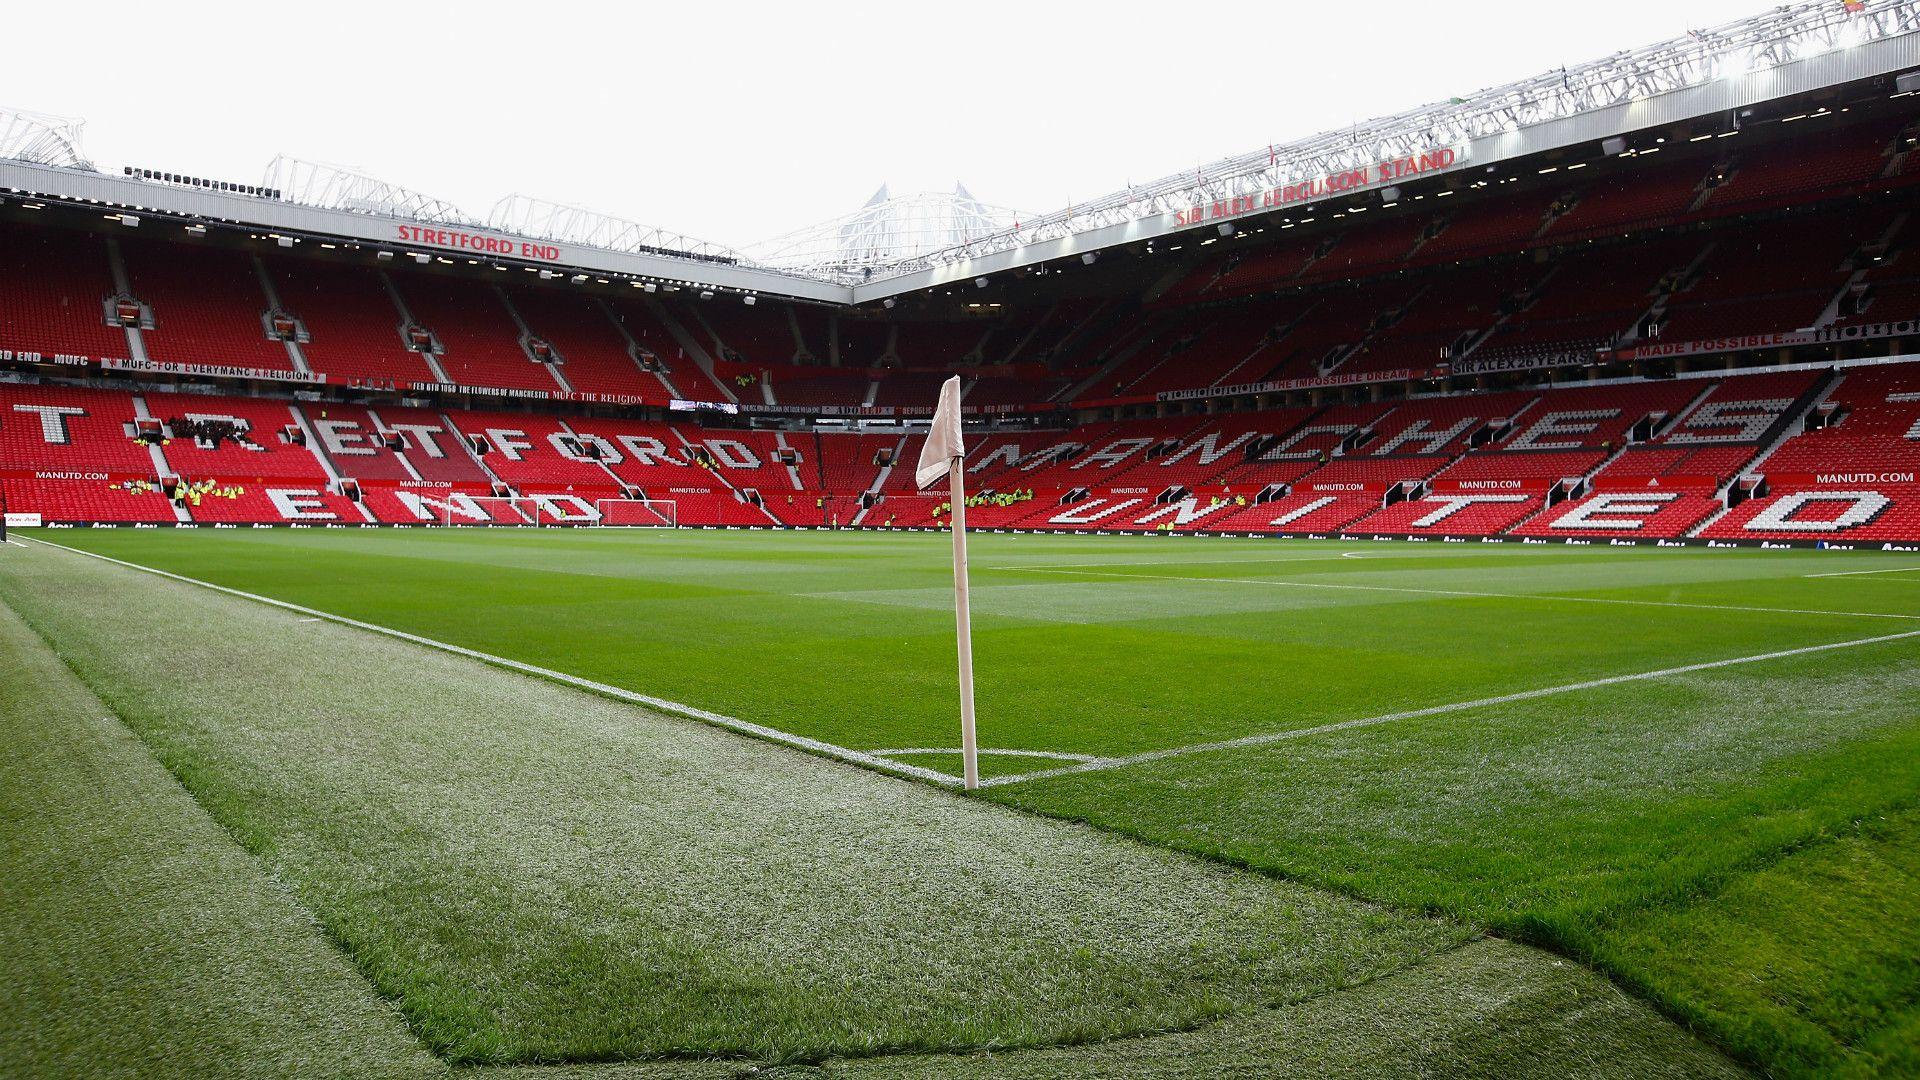 Manchester United's big business rides on record sponsor revenues